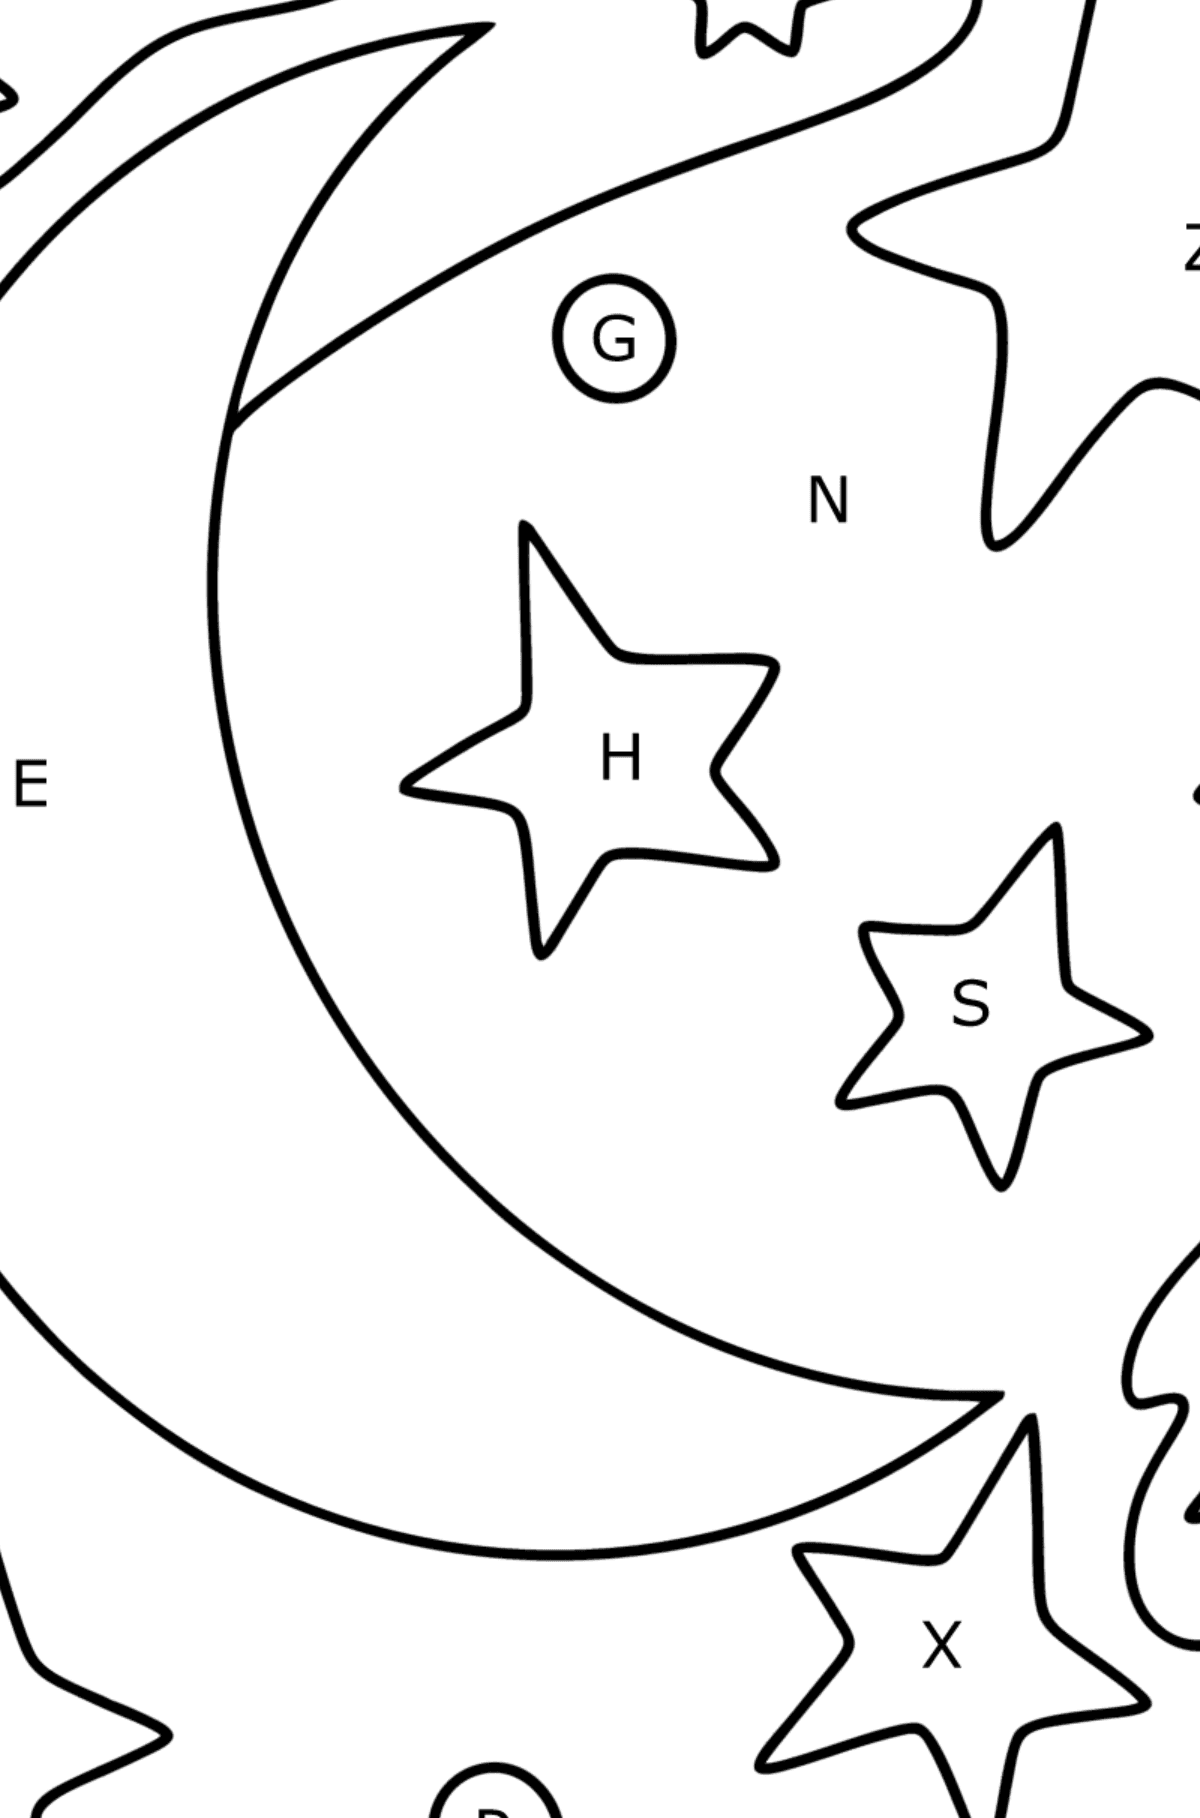 Coloring page moon and stars - Coloring by Letters for Kids